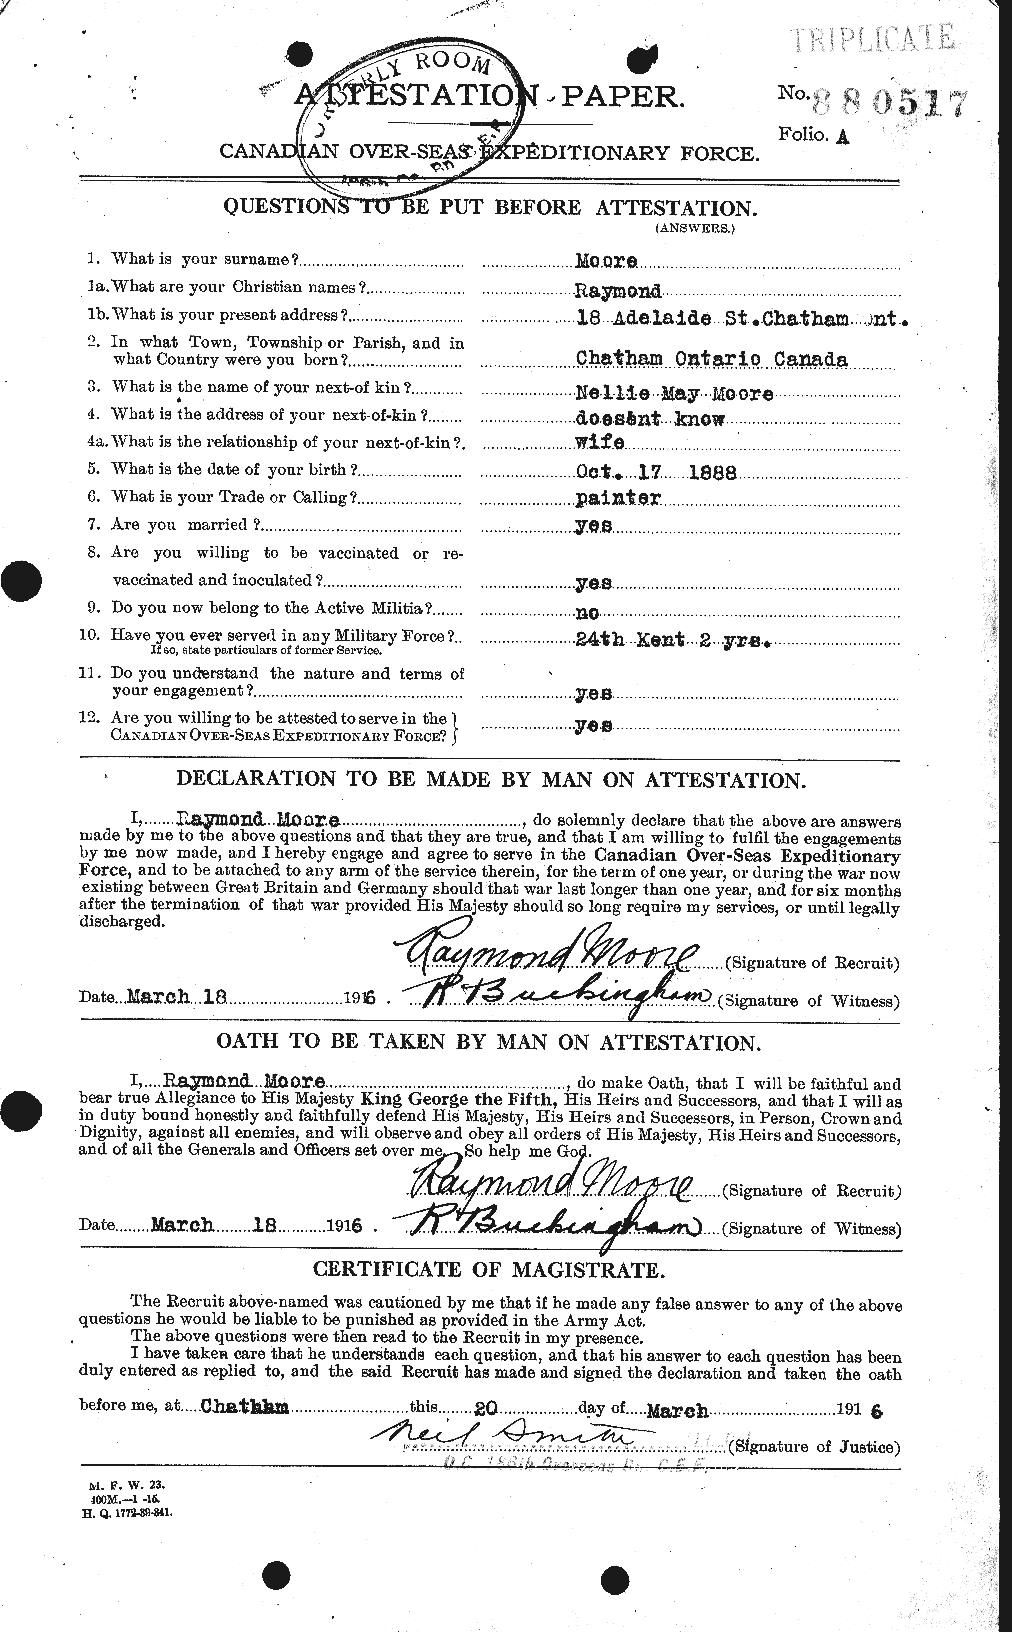 Personnel Records of the First World War - CEF 503519a